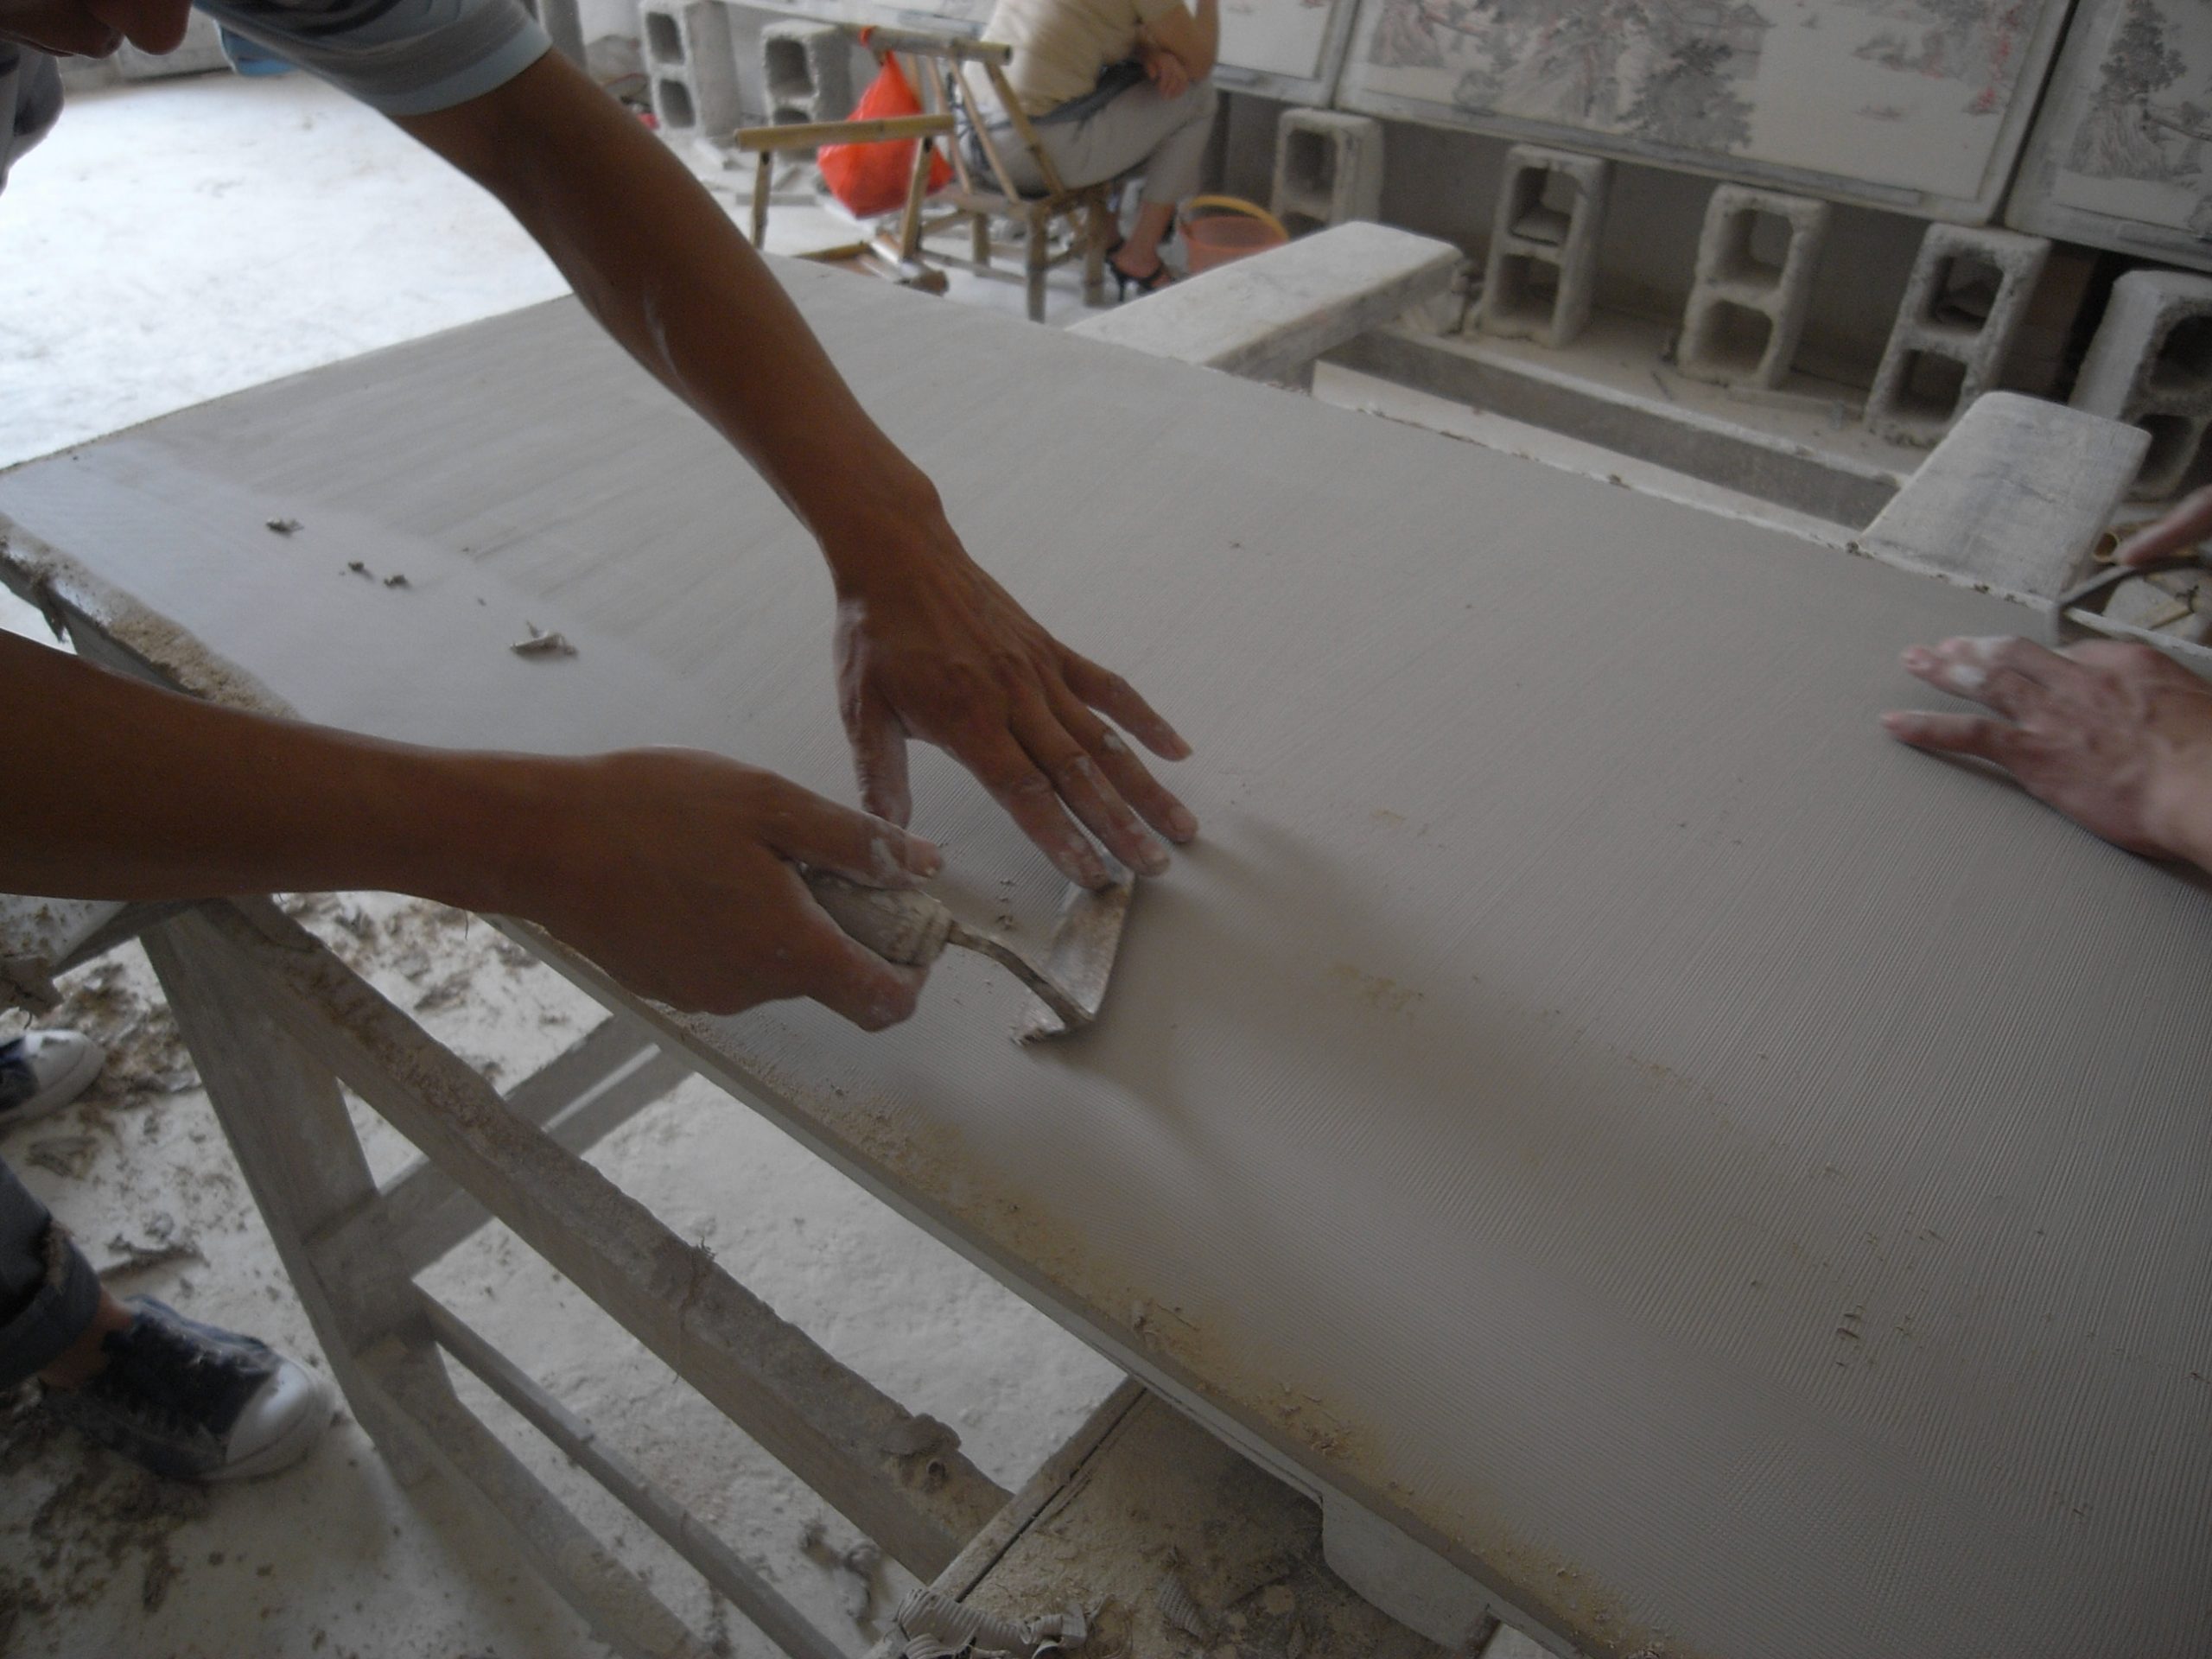 A studio assistant smoothing out the clay surface of a work. Photo courtesy of the artist.